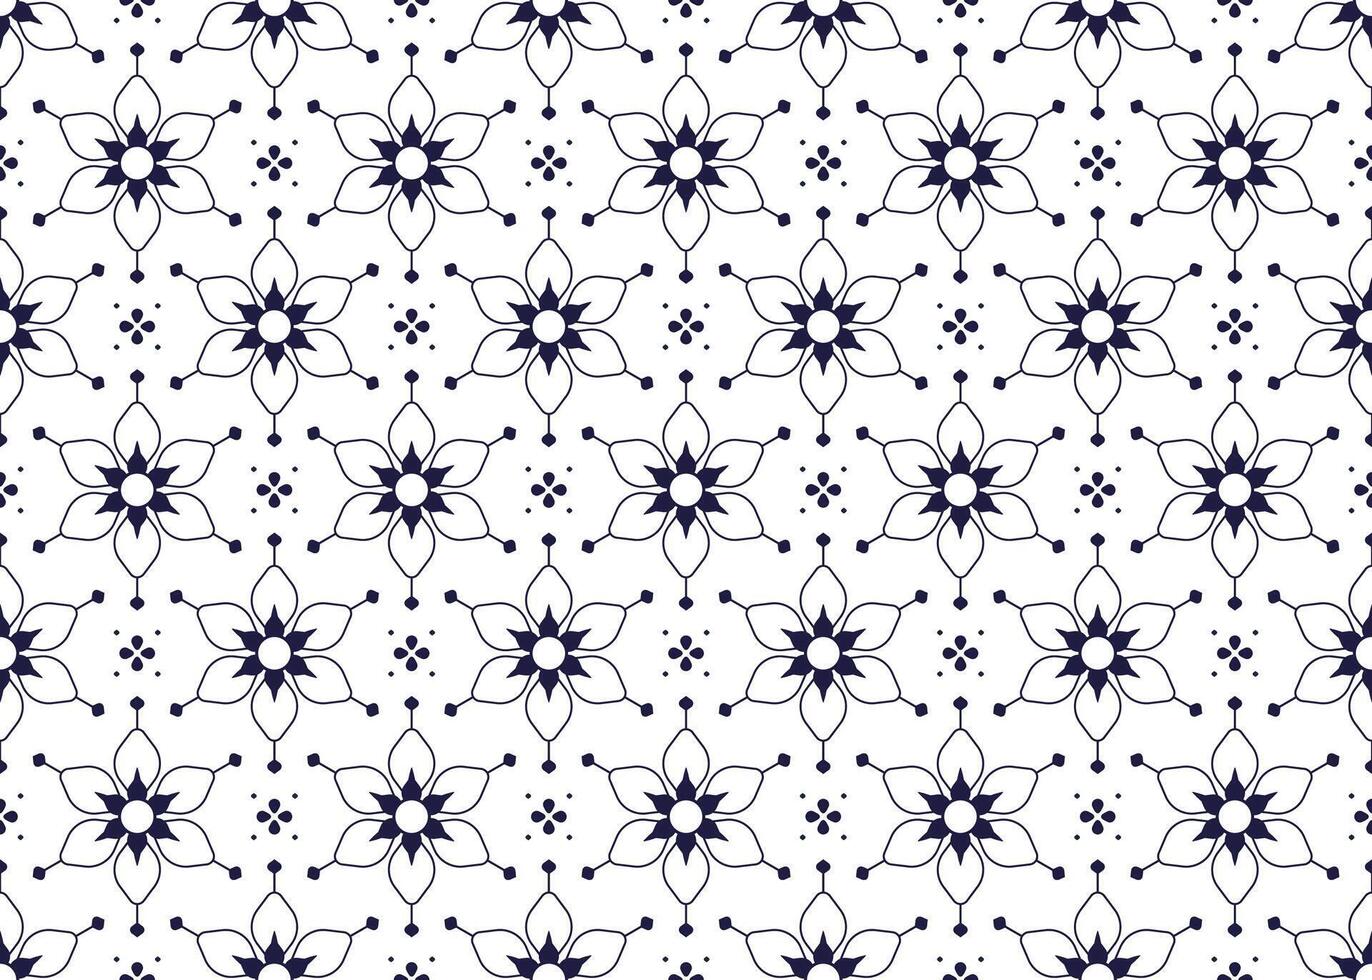 Symbol flowers outline on white background, ethnic fabric seamless pattern design for cloth, carpet, batik, wallpaper, wrapping etc. vector